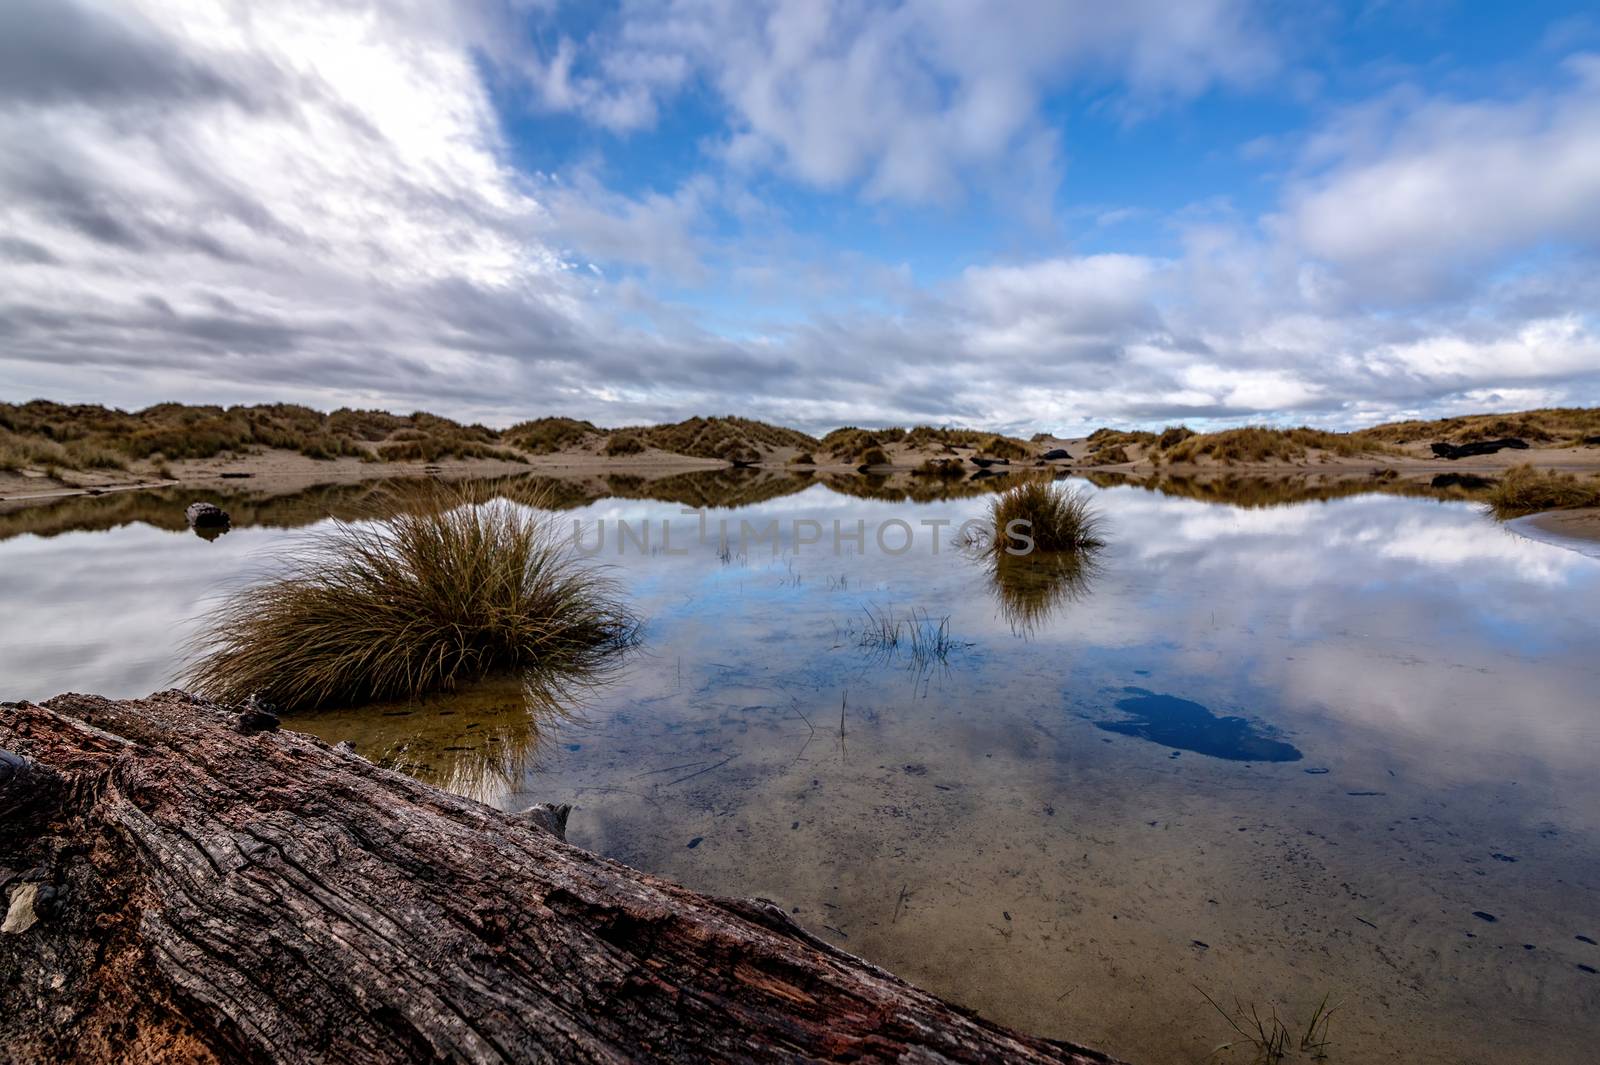 Reflections in a Rainwater Pond, Sand Dunes, Oregon, USA by backyard_photography